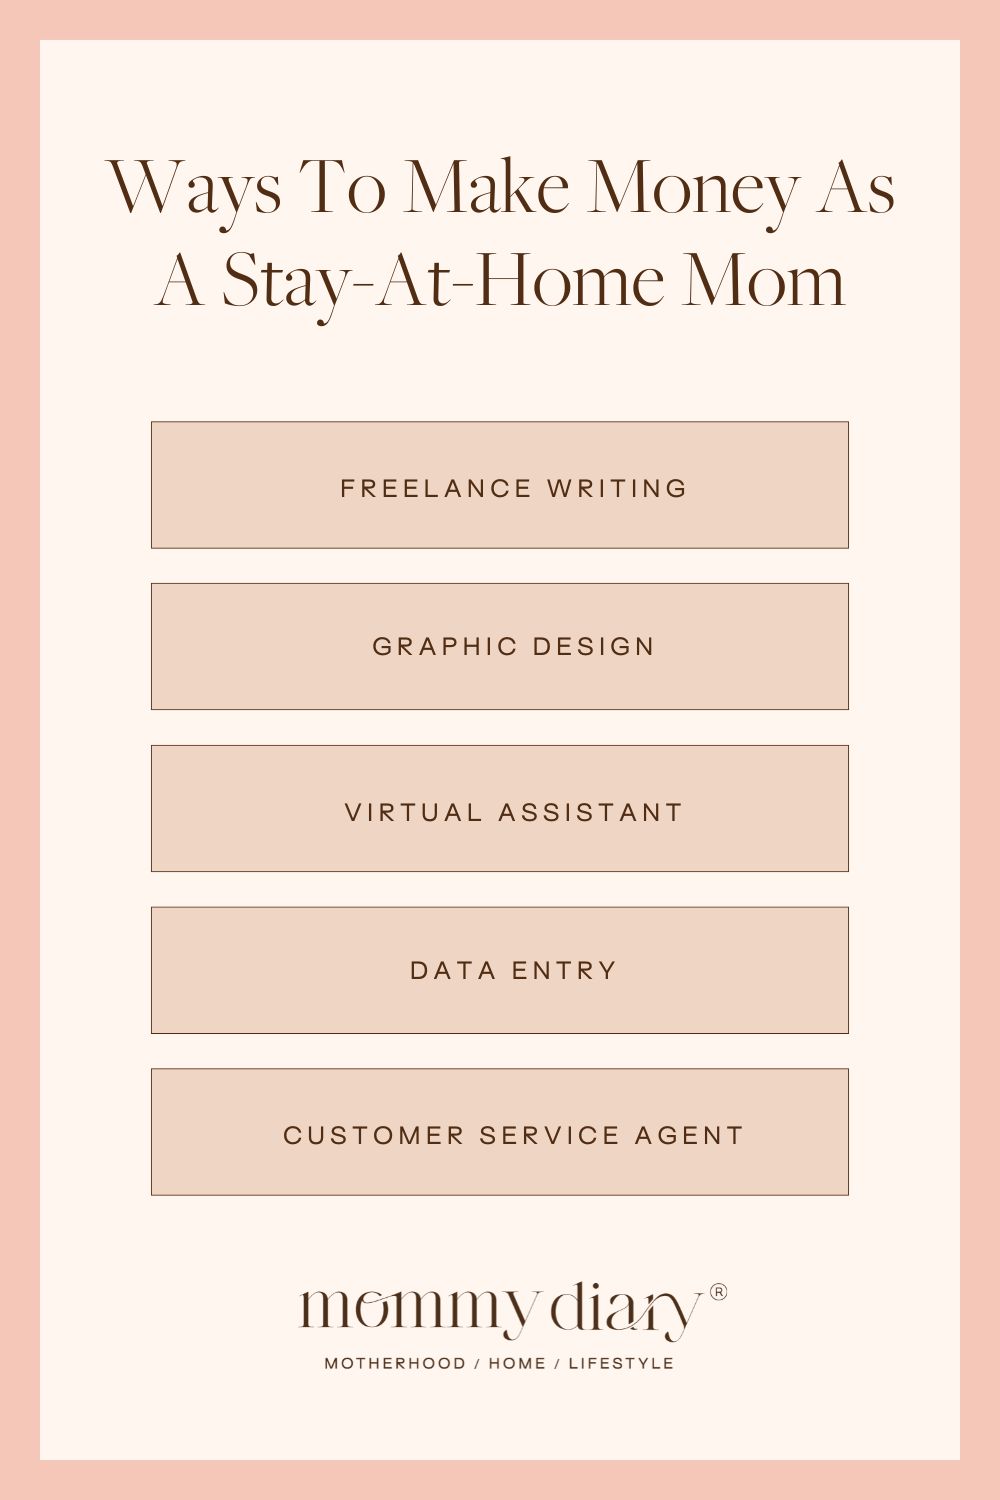 Ways To Make Money As A Stay-At-Home Mom